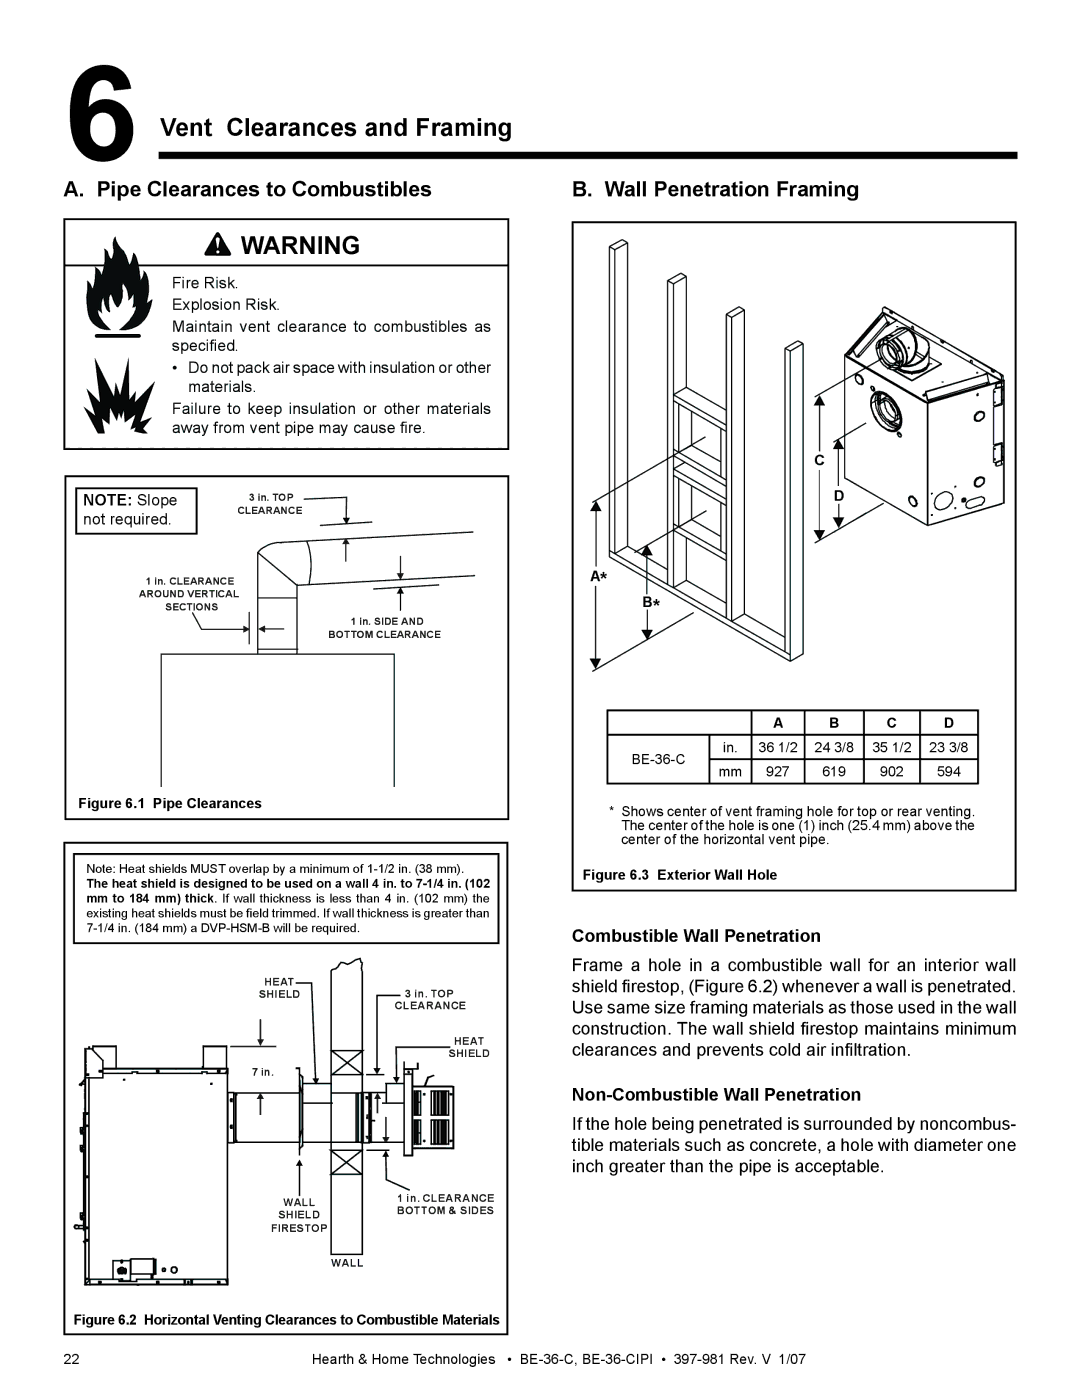 Hearth and Home Technologies BE-36-C Vent Clearances and Framing, Pipe Clearances to Combustibles Wall Penetration Framing 